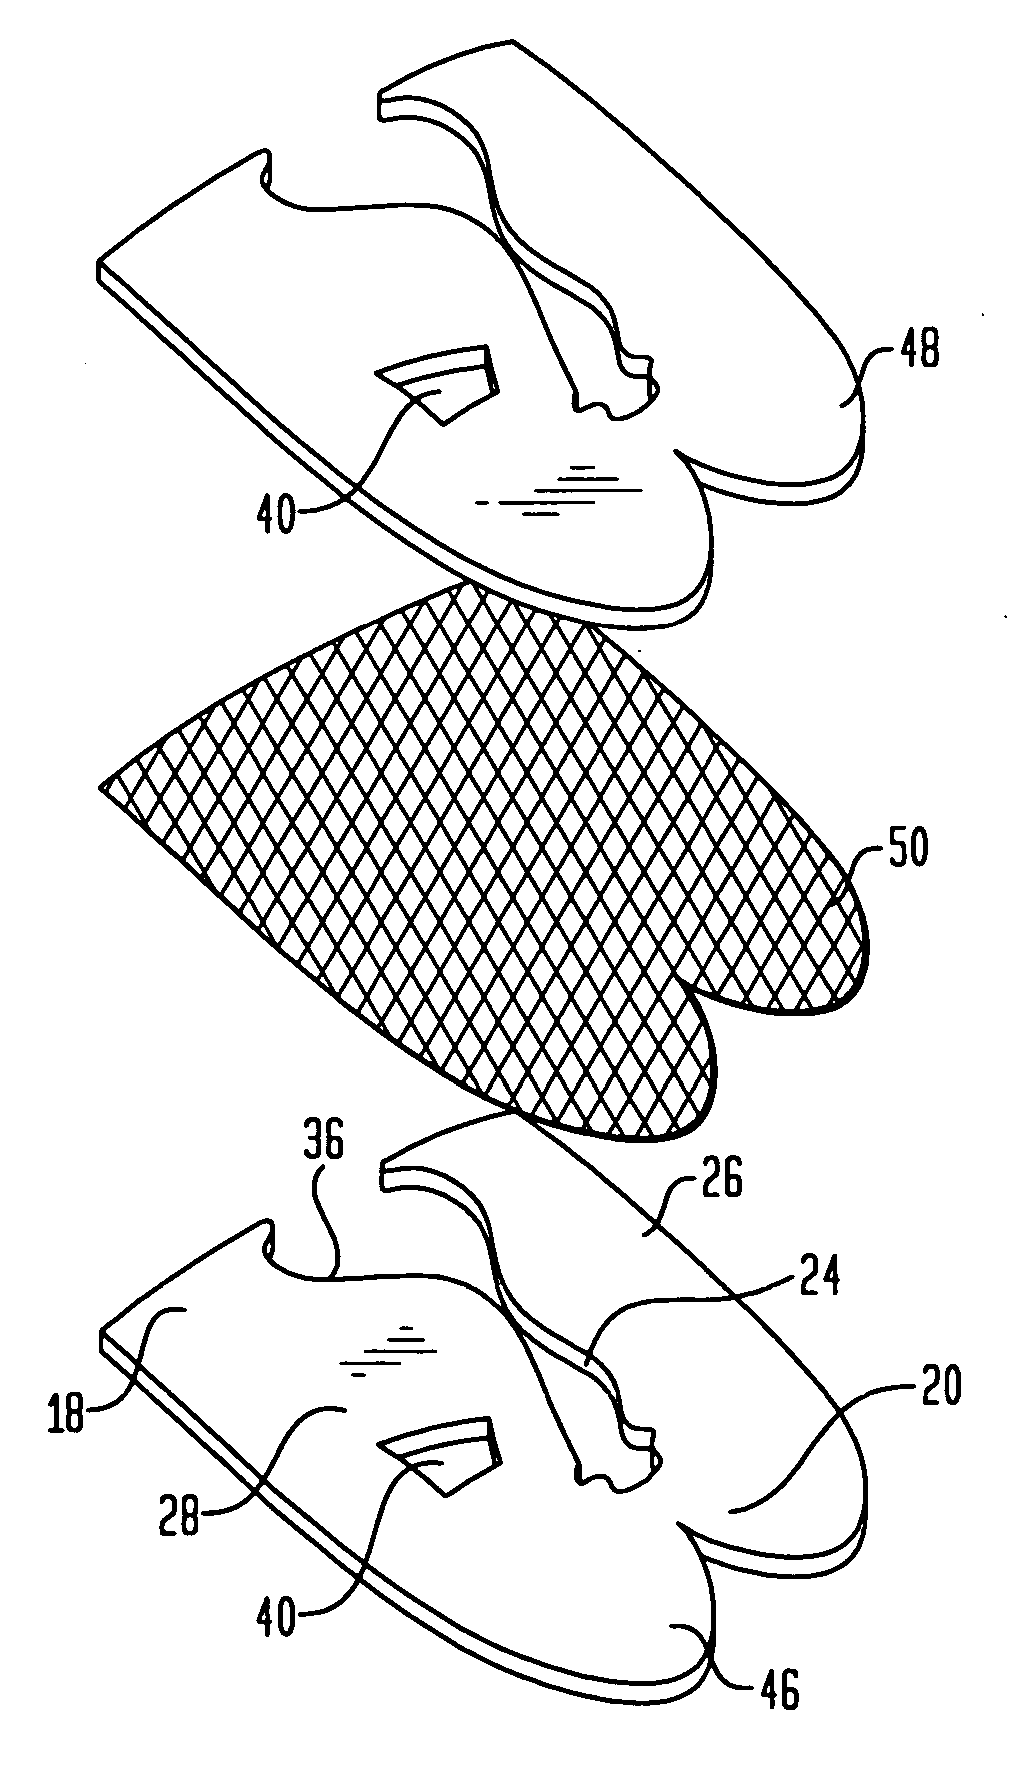 Compression molded footwear and methods of manufacture